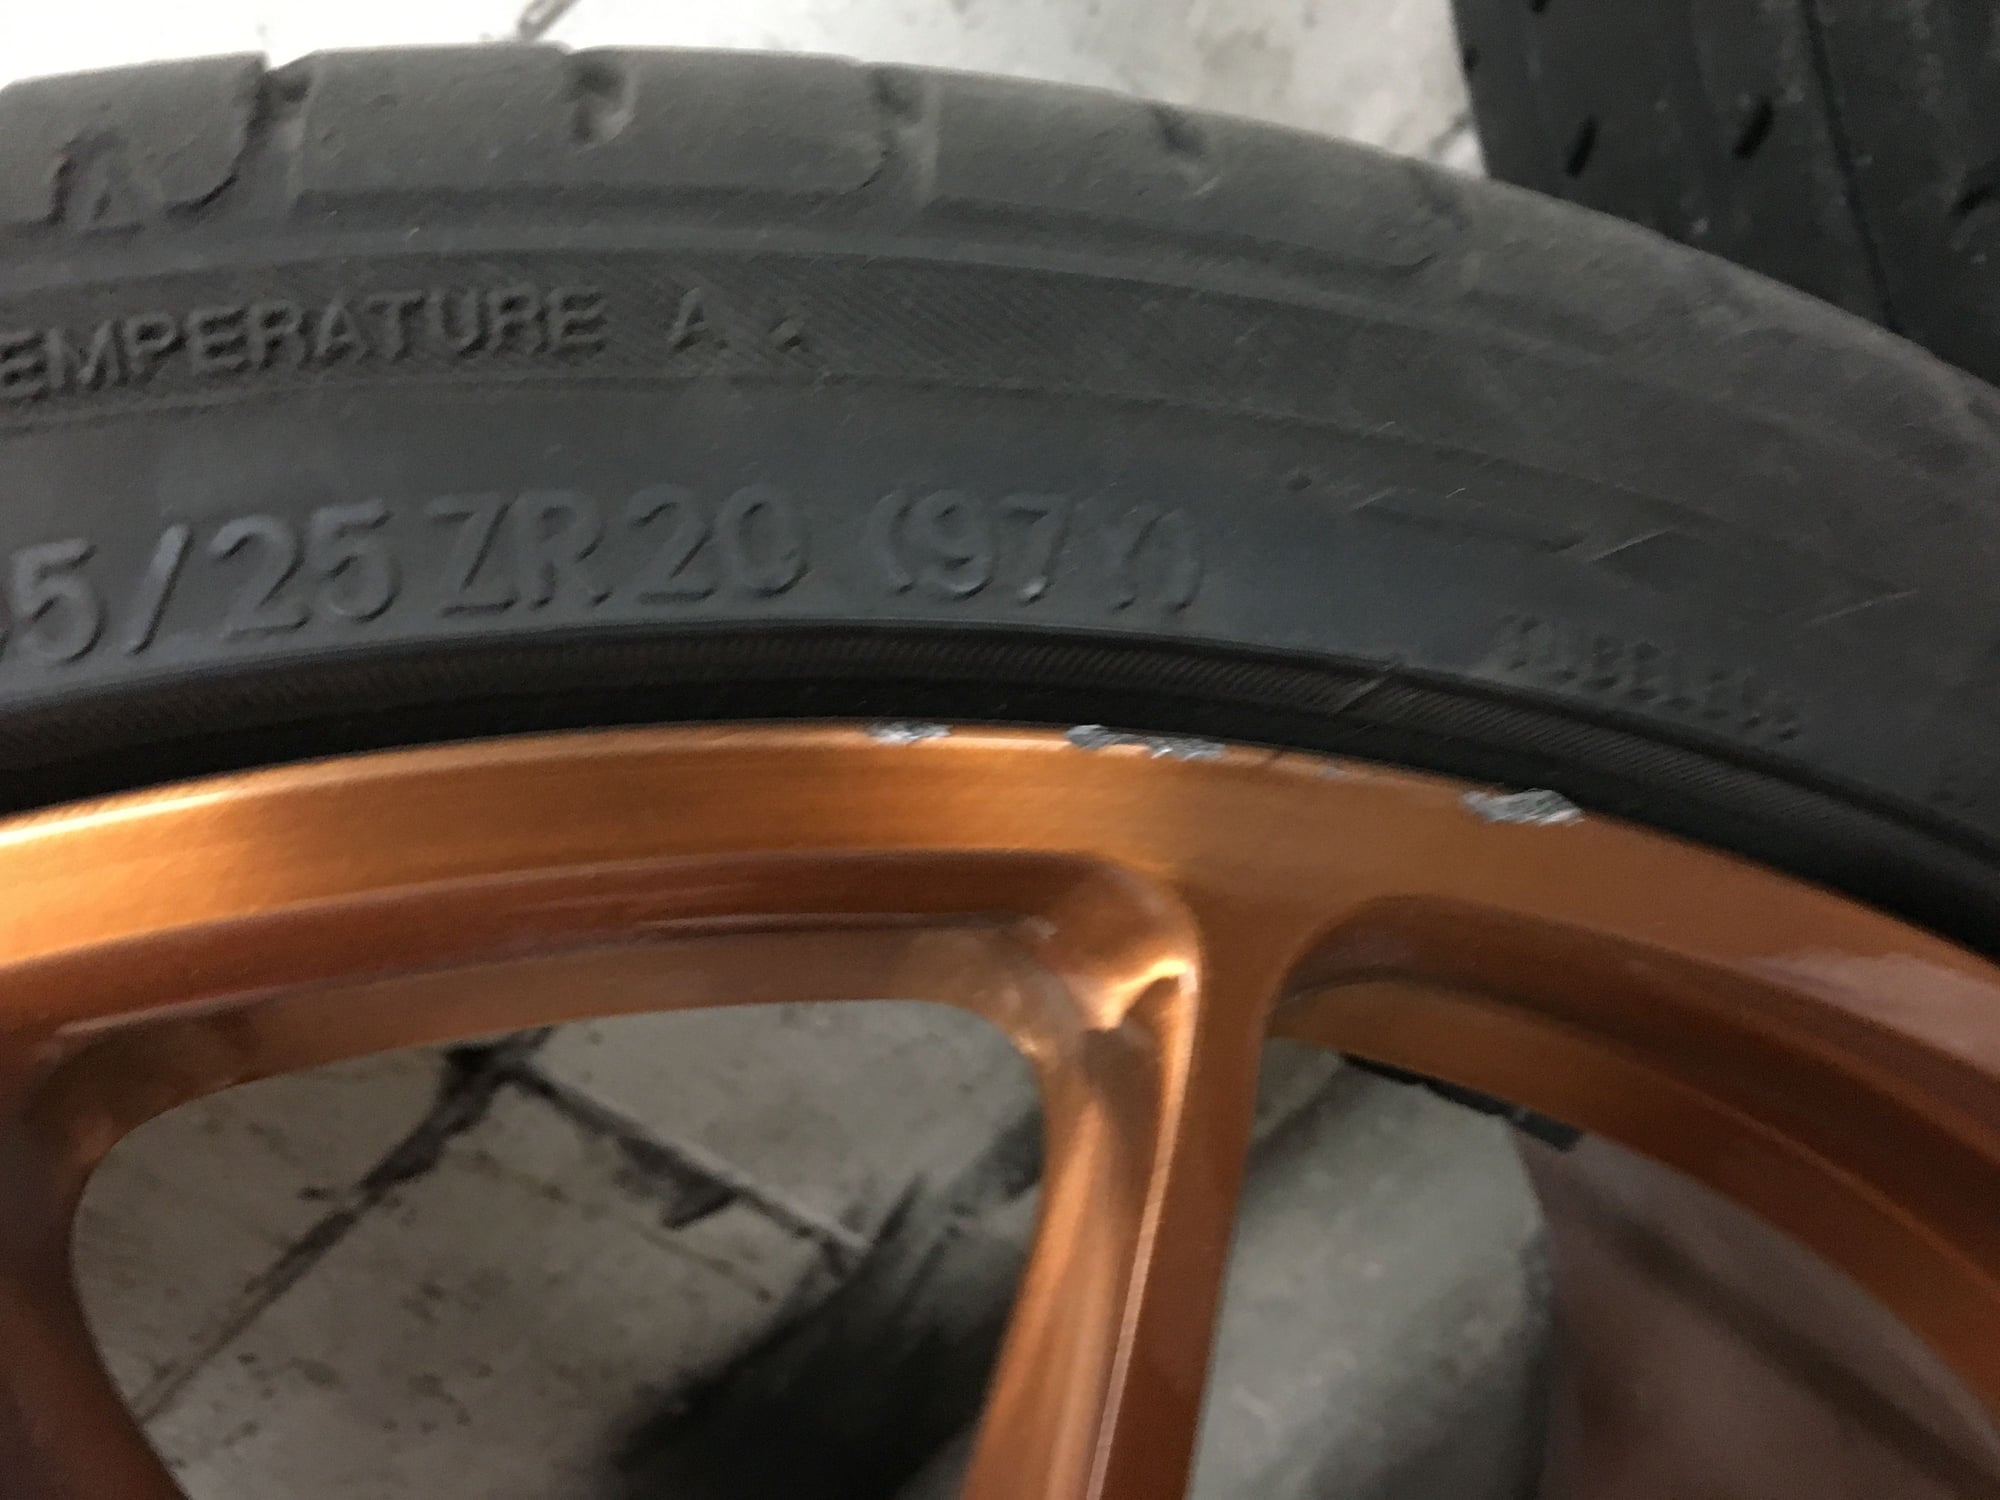 Wheels and Tires/Axles - 20" inch HRE P104 bronze w/ Toyo Proxes T1 305/25r20 265/30r20 5x112 Mercedes - Used - Champlain, NY 12919, United States